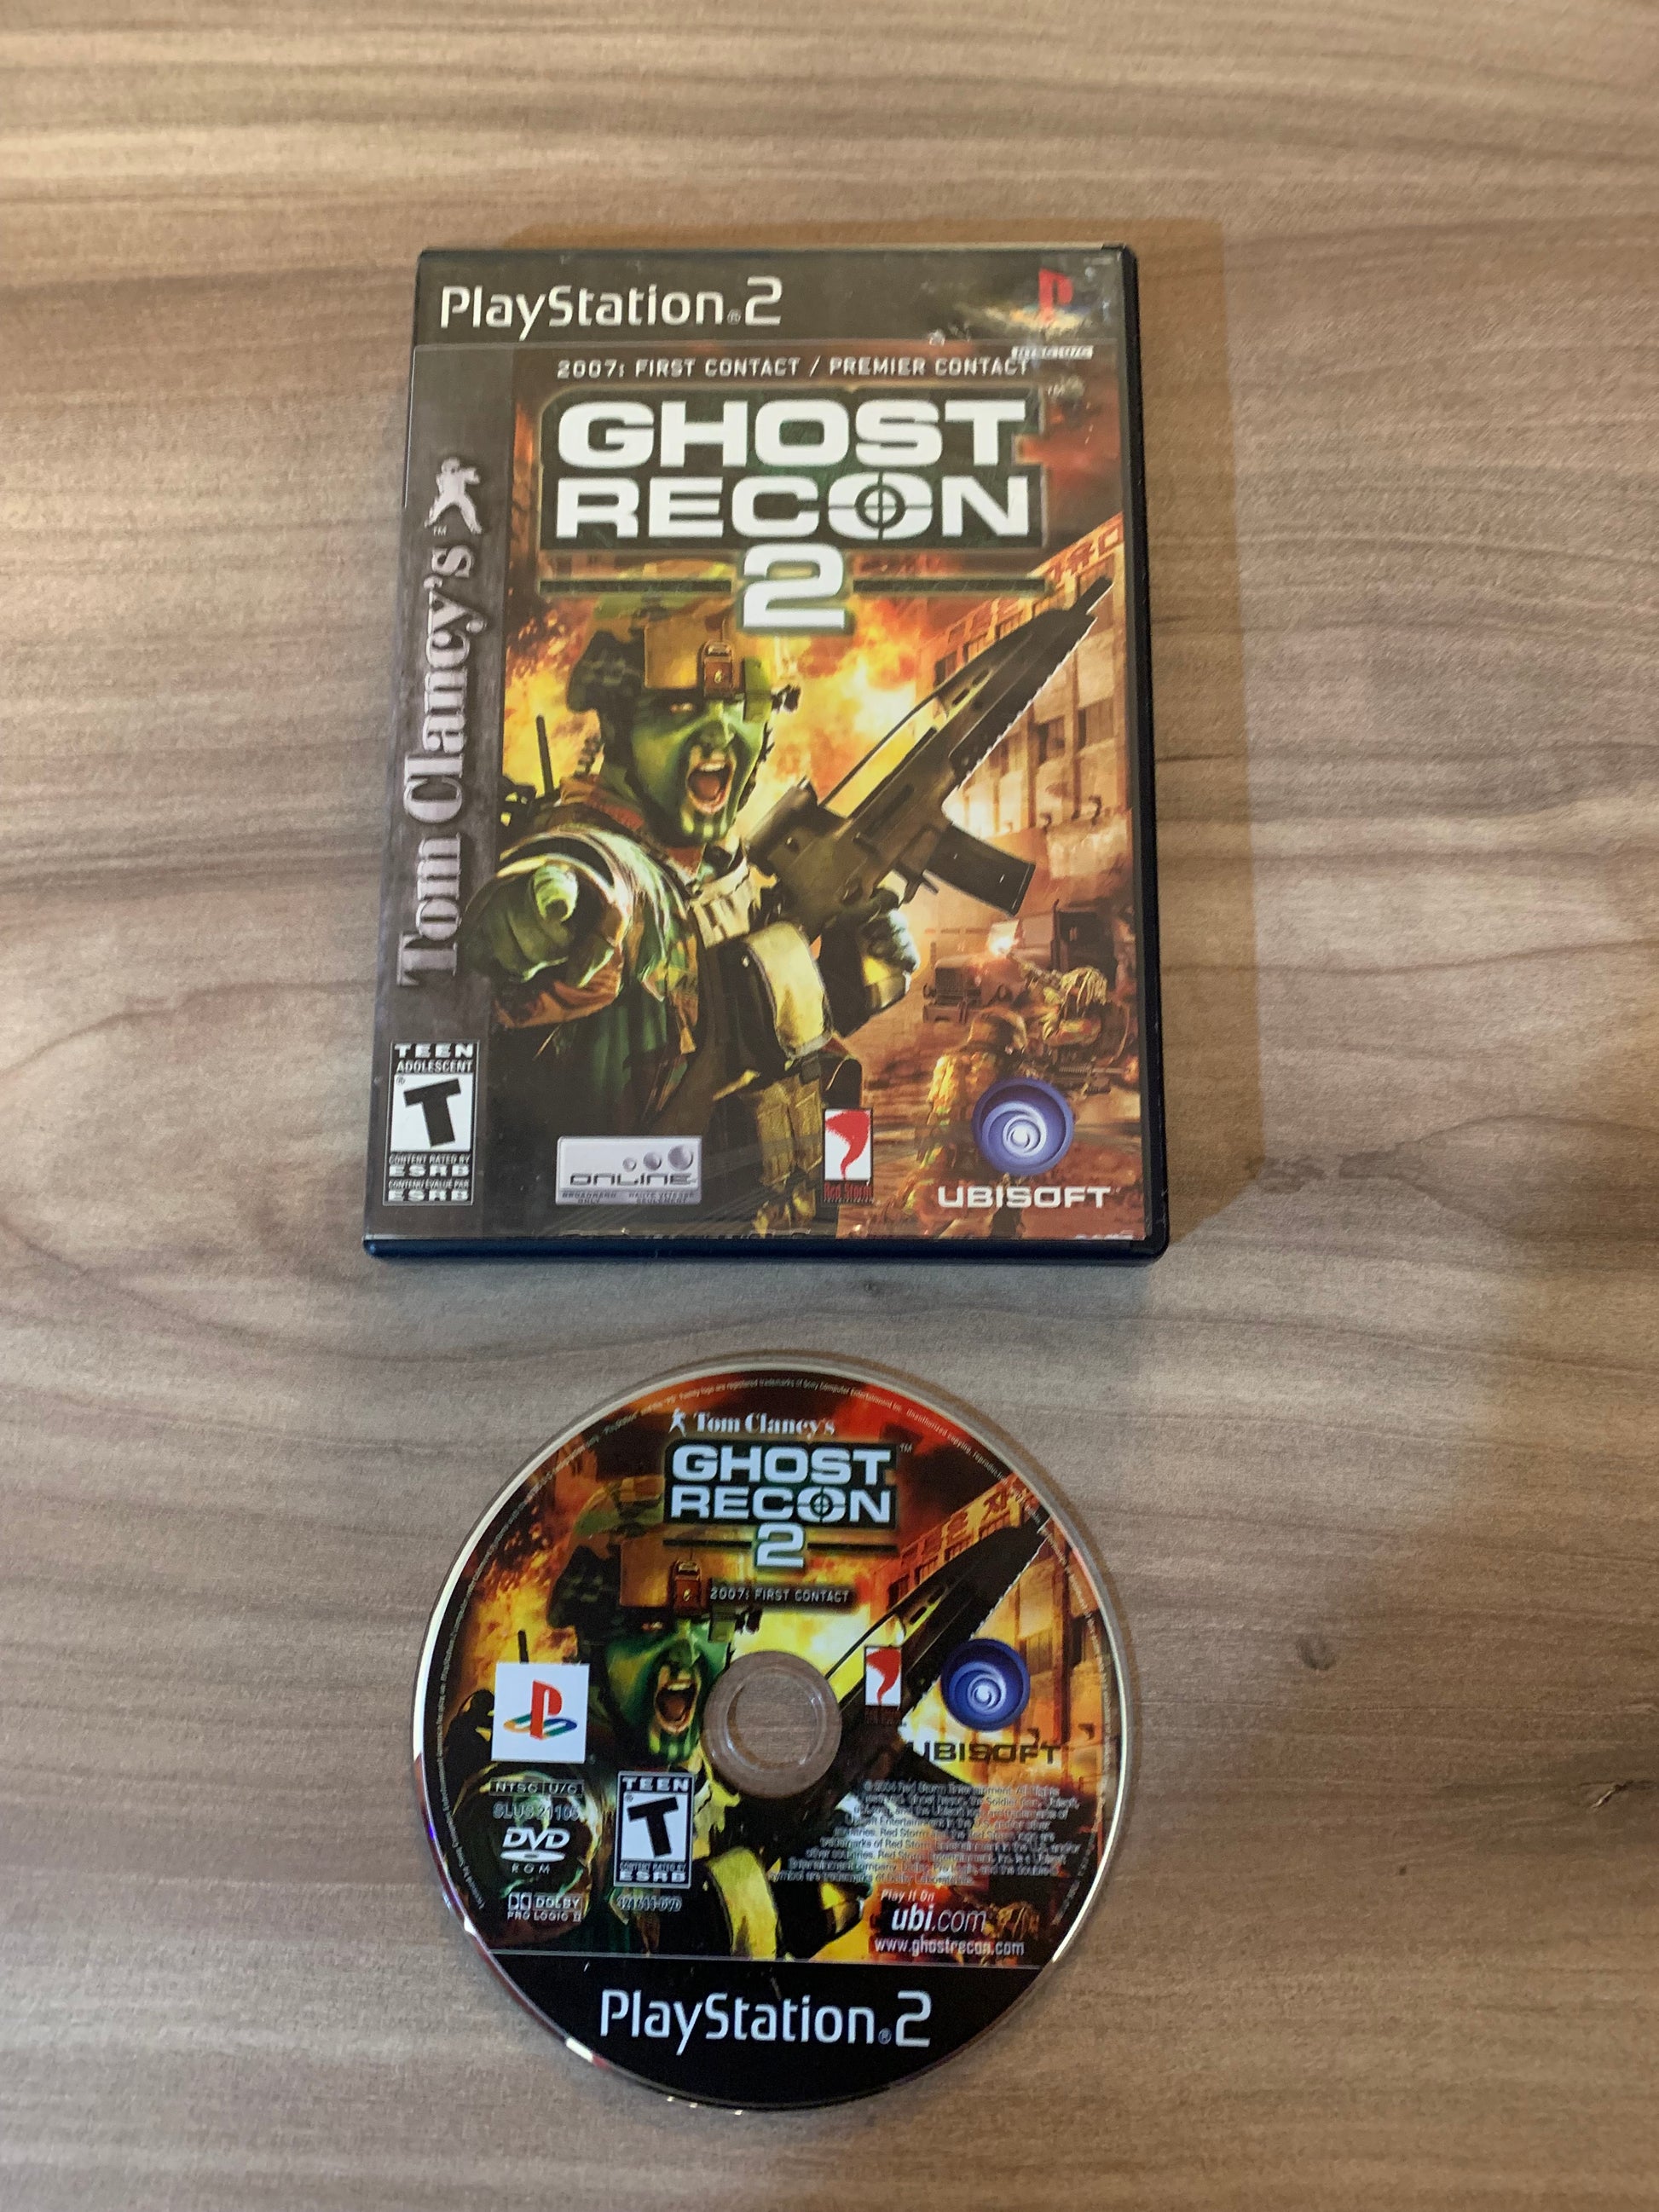 PiXEL-RETRO.COM : SONY PLAYSTATION 2 (PS2) COMPLET CIB BOX MANUAL GAME NTSC TOM CLANCY'S GHOST RECON 2